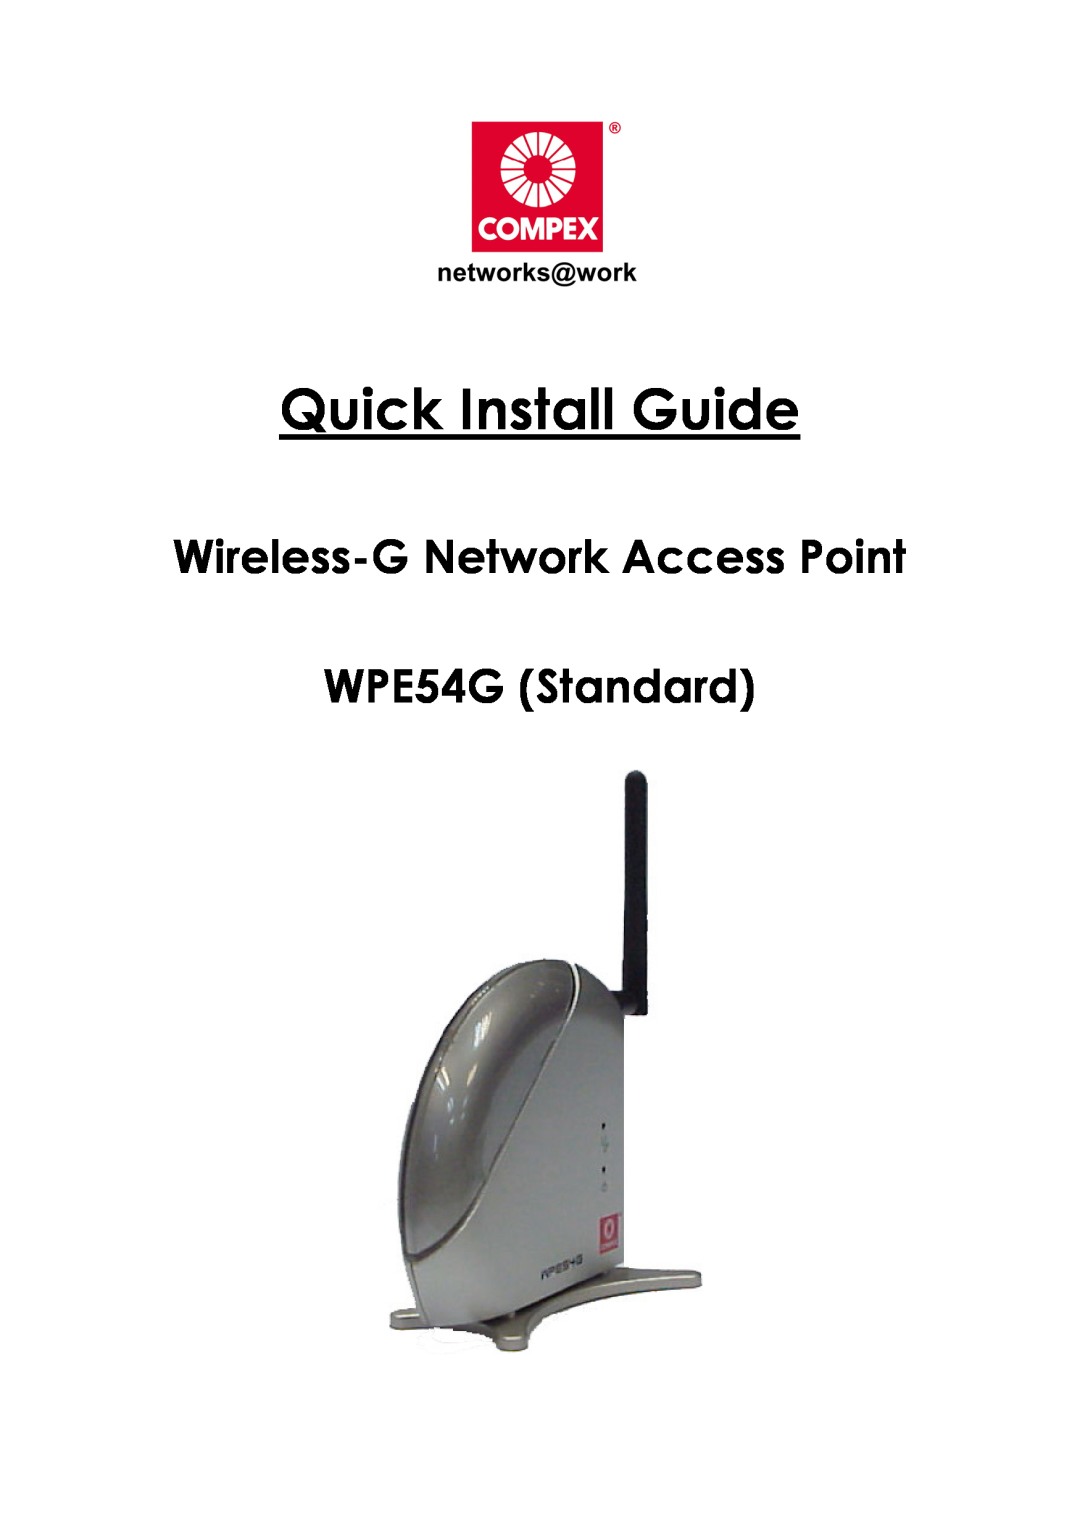 Compex Systems manual Quick Install Guide, Wireless-G Network Access Point WPE54G Standard 